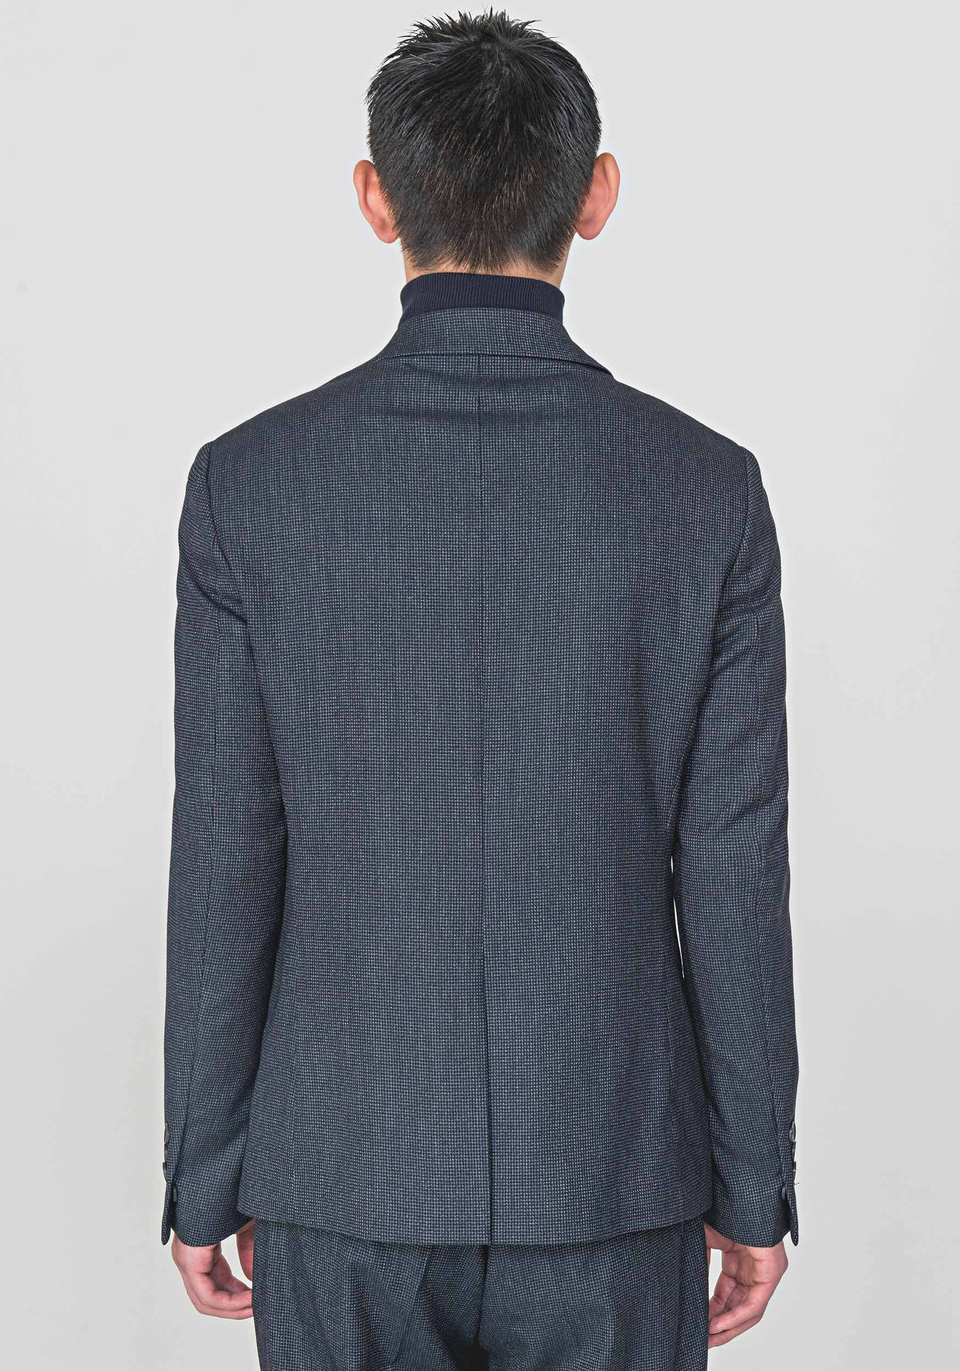 SLIM-FIT “BONNIE” JACKET MADE FROM A MICRO-PATTERNED STRETCHY FABRIC - Antony Morato Online Shop